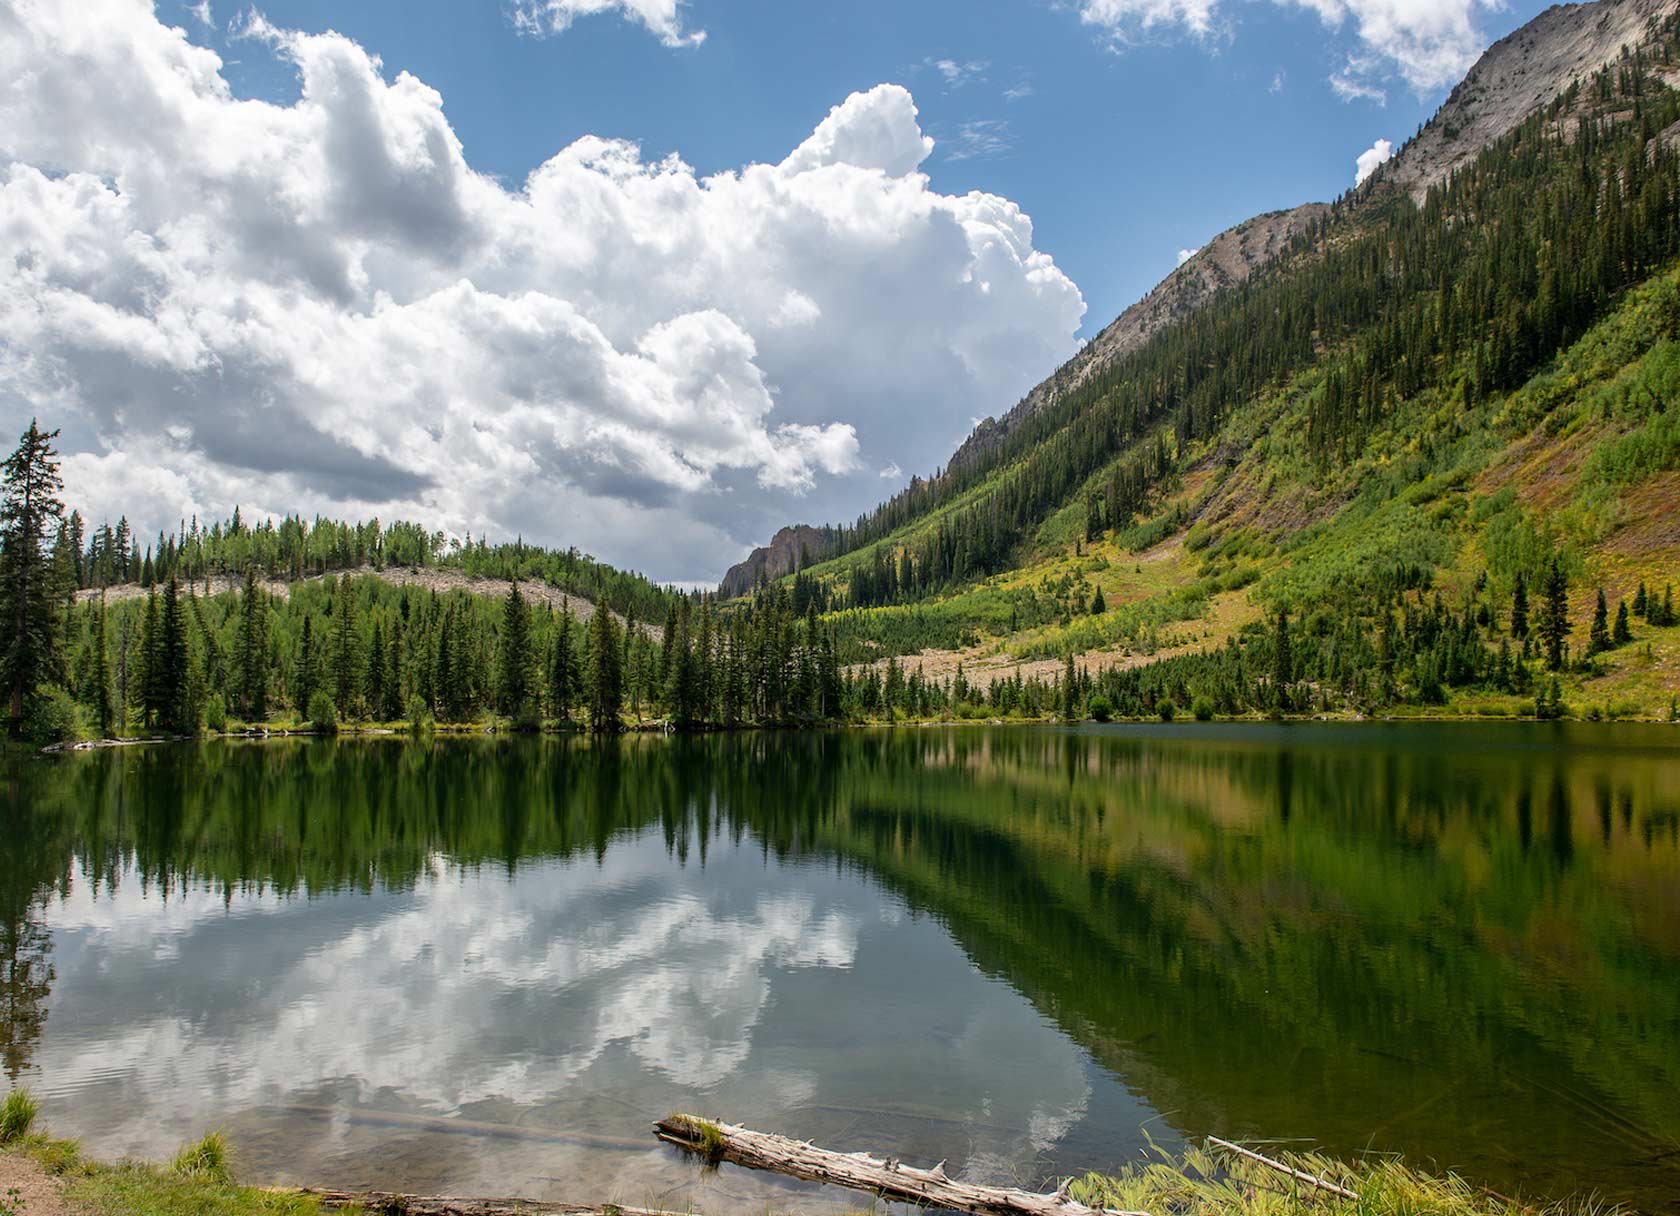 Experience a high country lake adventure in the Rocky Mountains in Colorado with Eleven Experience